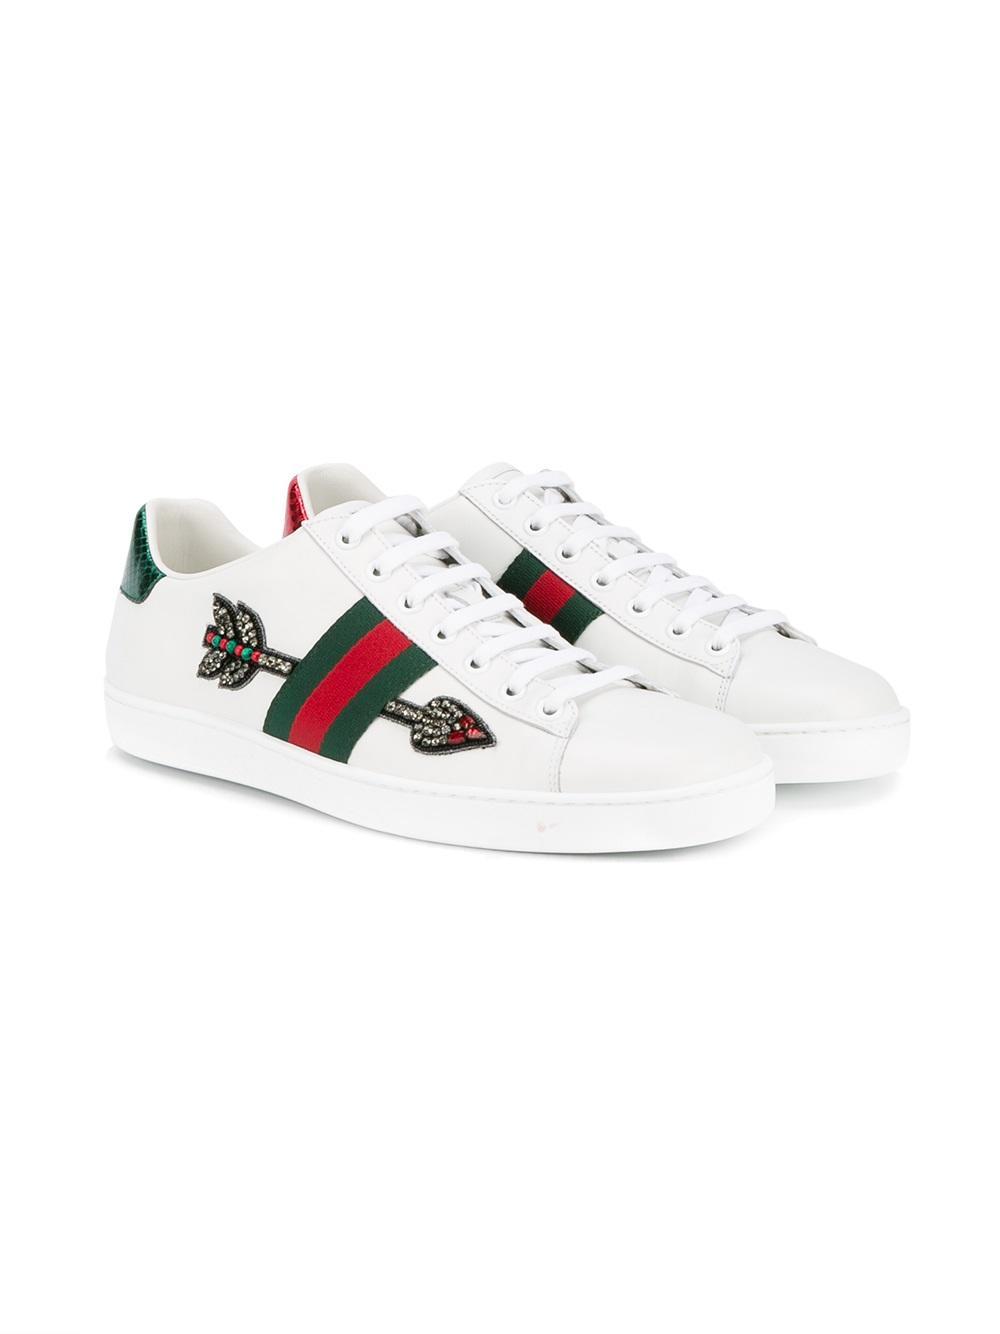 Gucci Leather Ace Sneakers With Lateral Band And Embroidered Arrow - Lyst